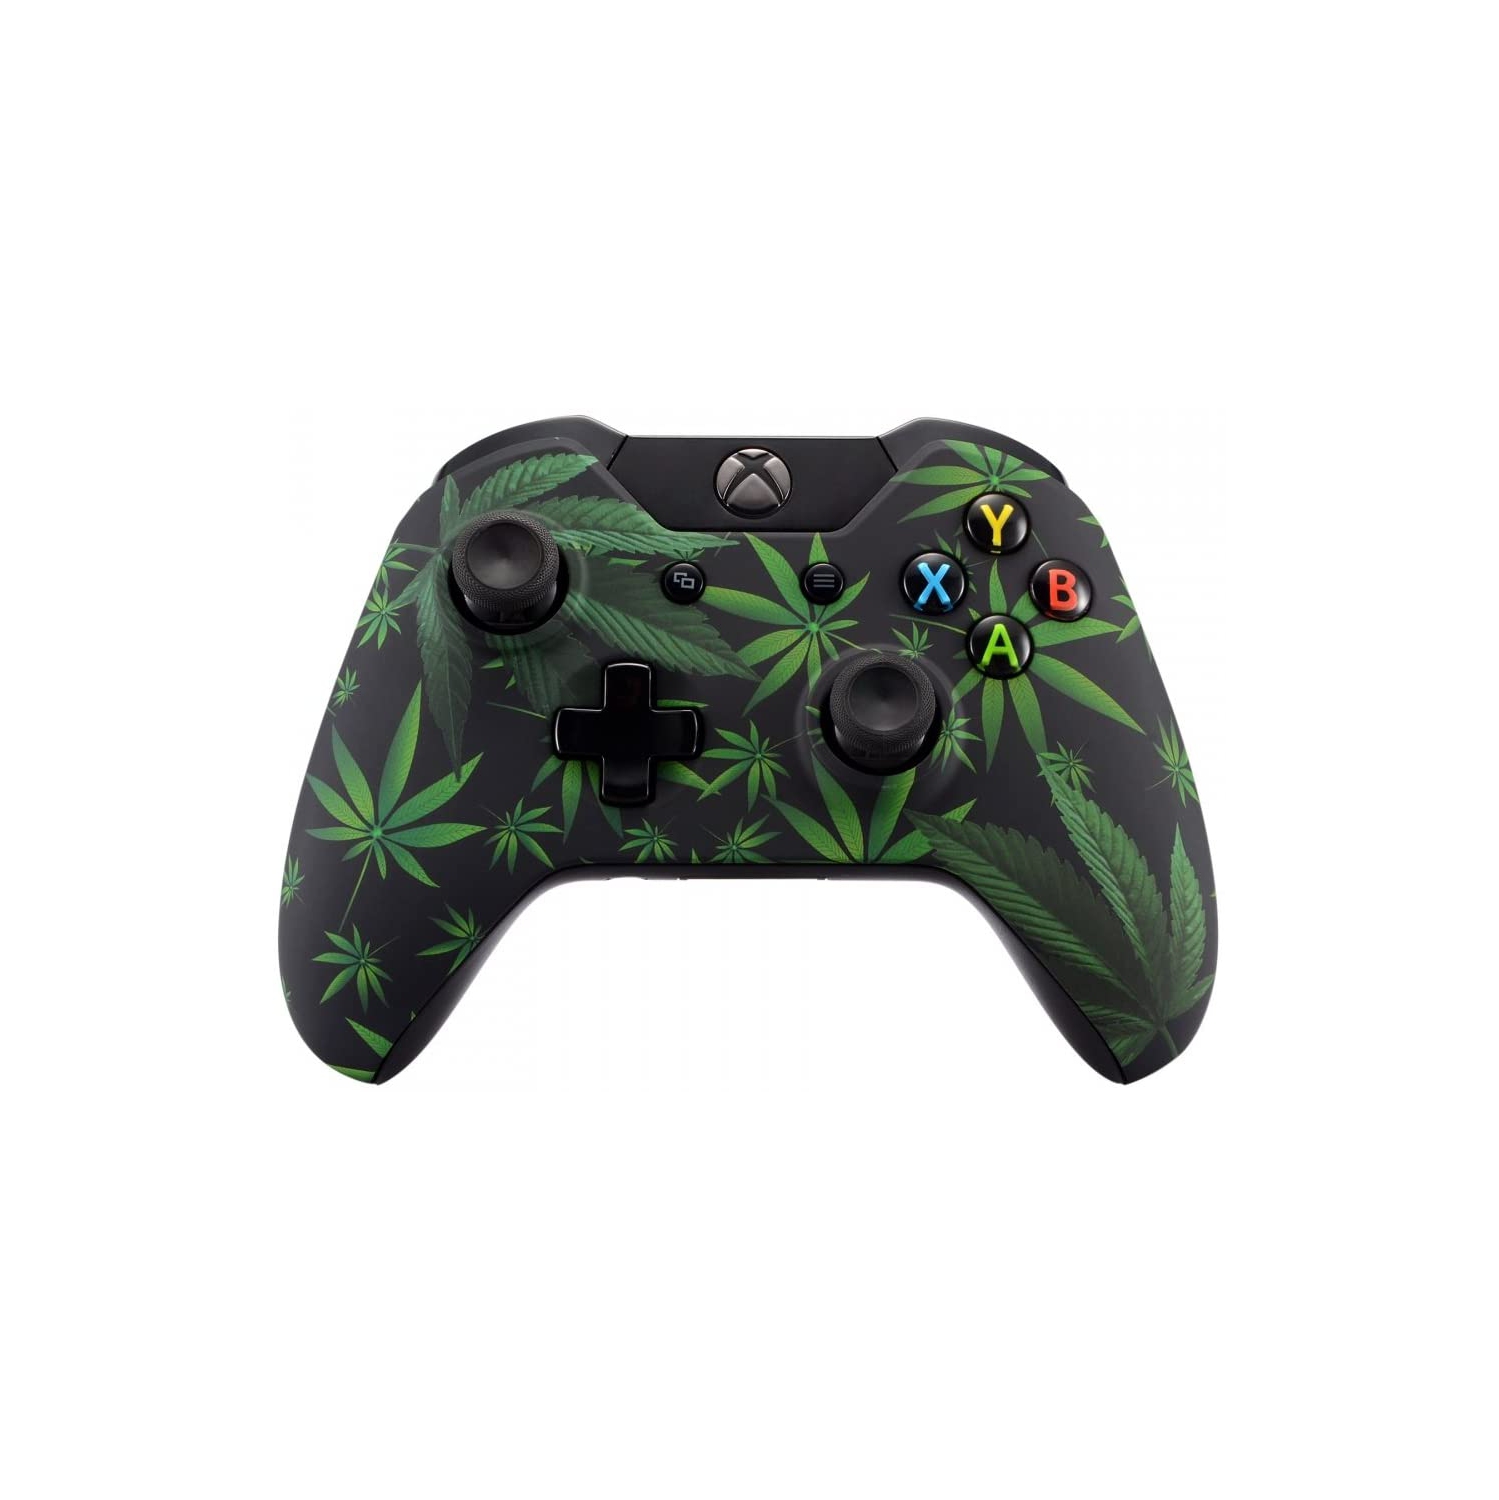 Green Weeds Leaves Soft Touch Grip Front Housing Shell Faceplate for Standard Xbox One Controller (Fits